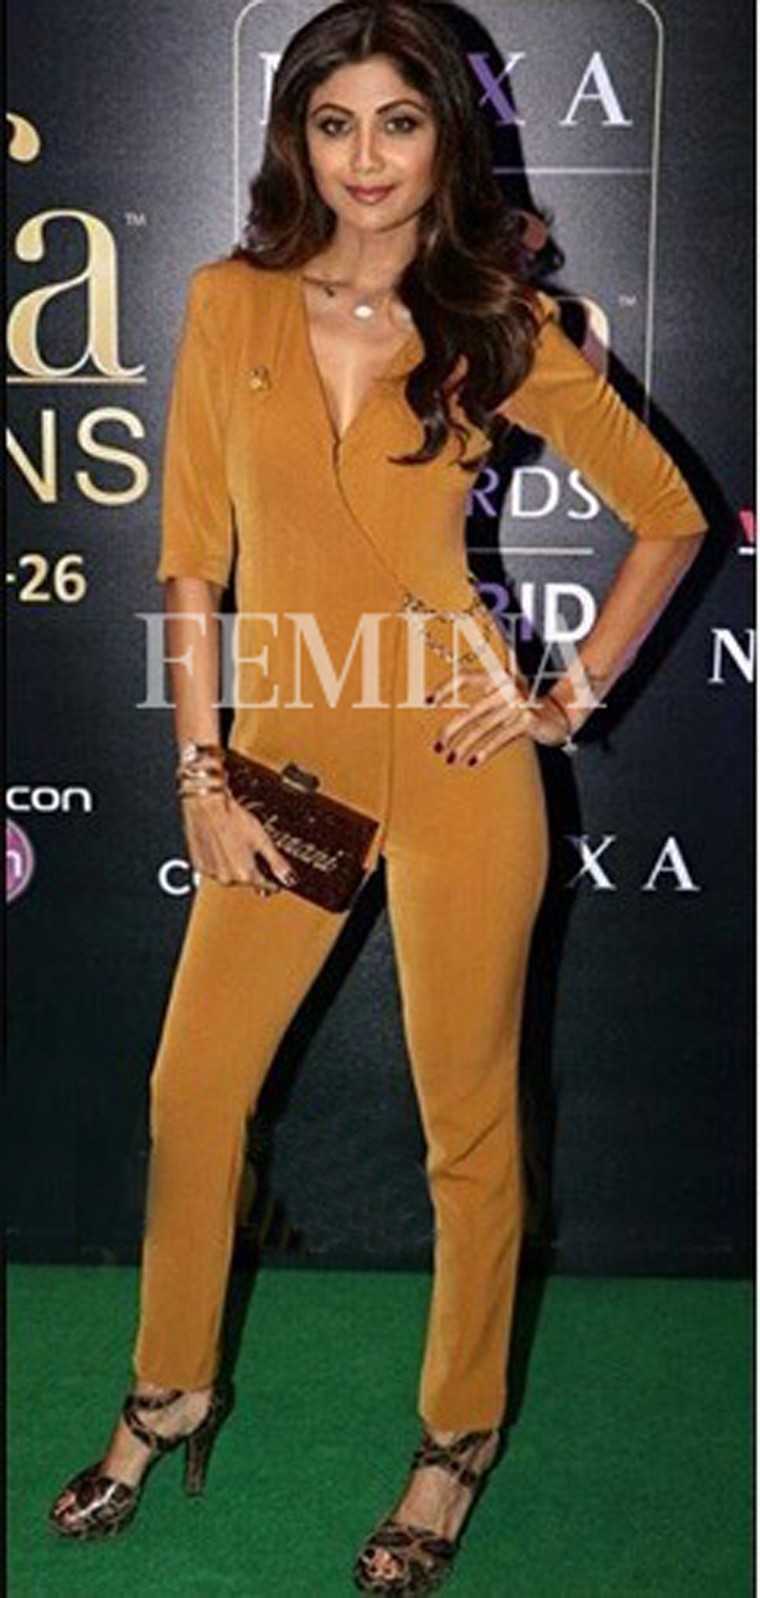 The ever-so-stunning, Shilpa Shetty made an appearance at a recent event pairing her Karn Malhotra suit with a Maharani monogrammed jewel tone clutch.